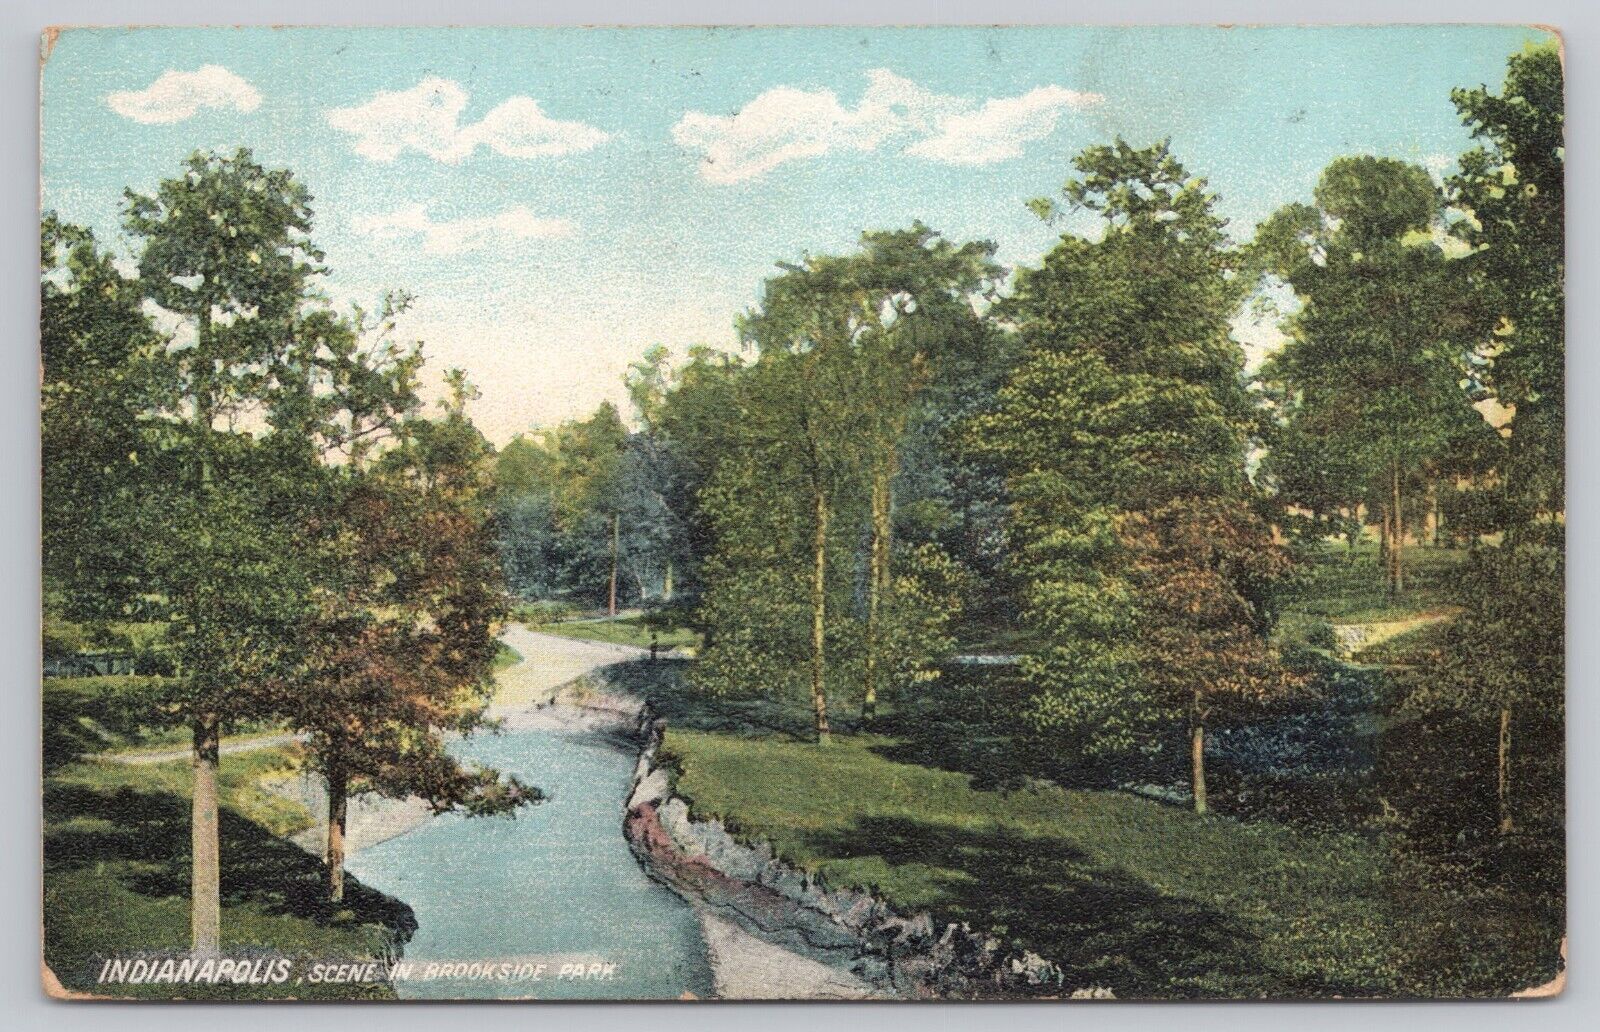 Indianapolis Indiana, Scenic View in Brookside Park, Vintage Postcard